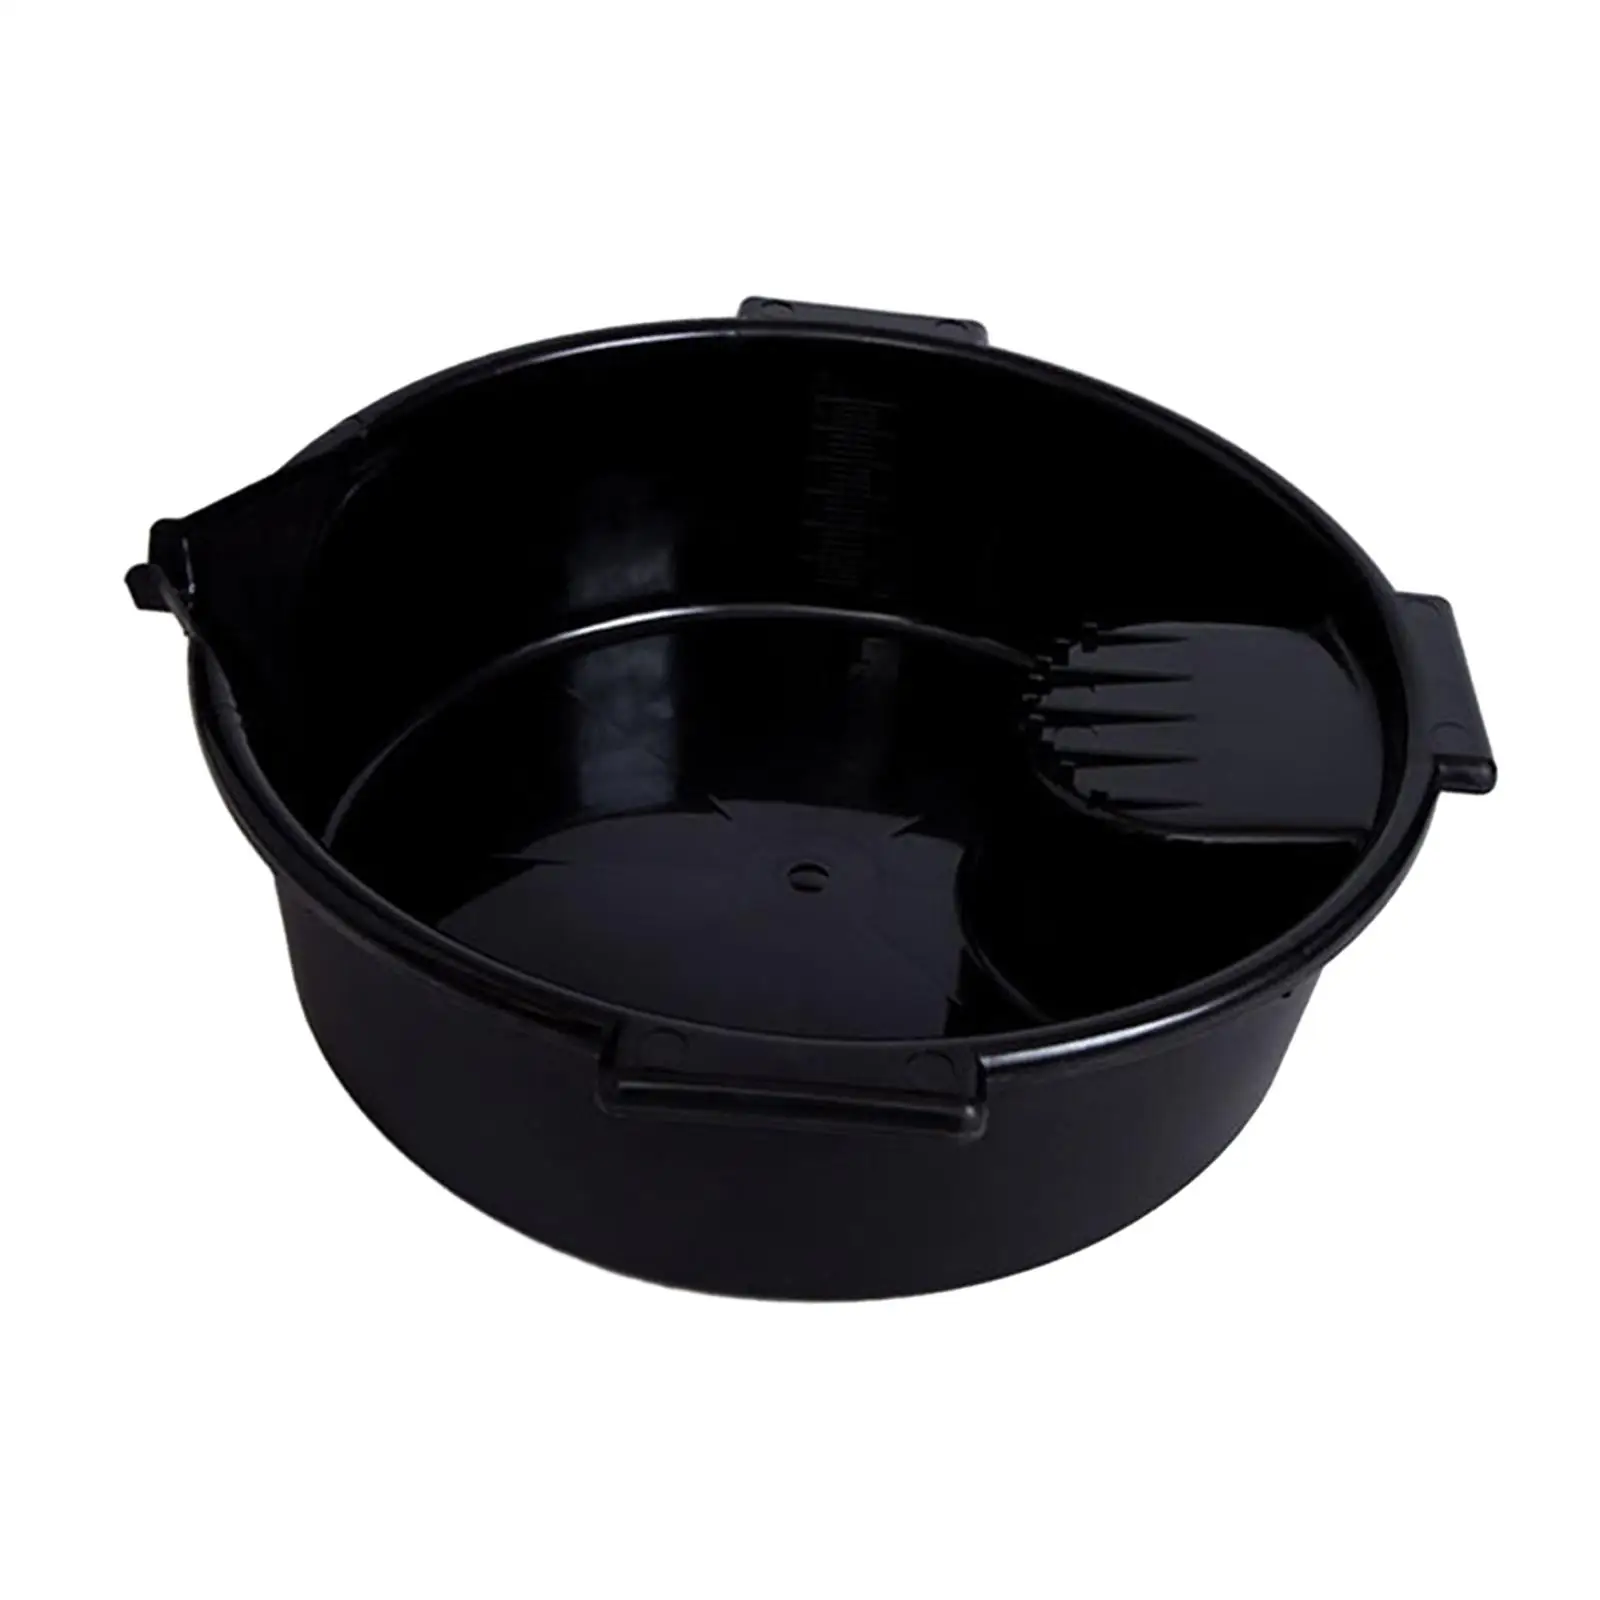 6L Oil Drain Container receiving basin Easy Cleaning for car truck motorcycleLightweight Oil Change Pan Fuel Drain pan